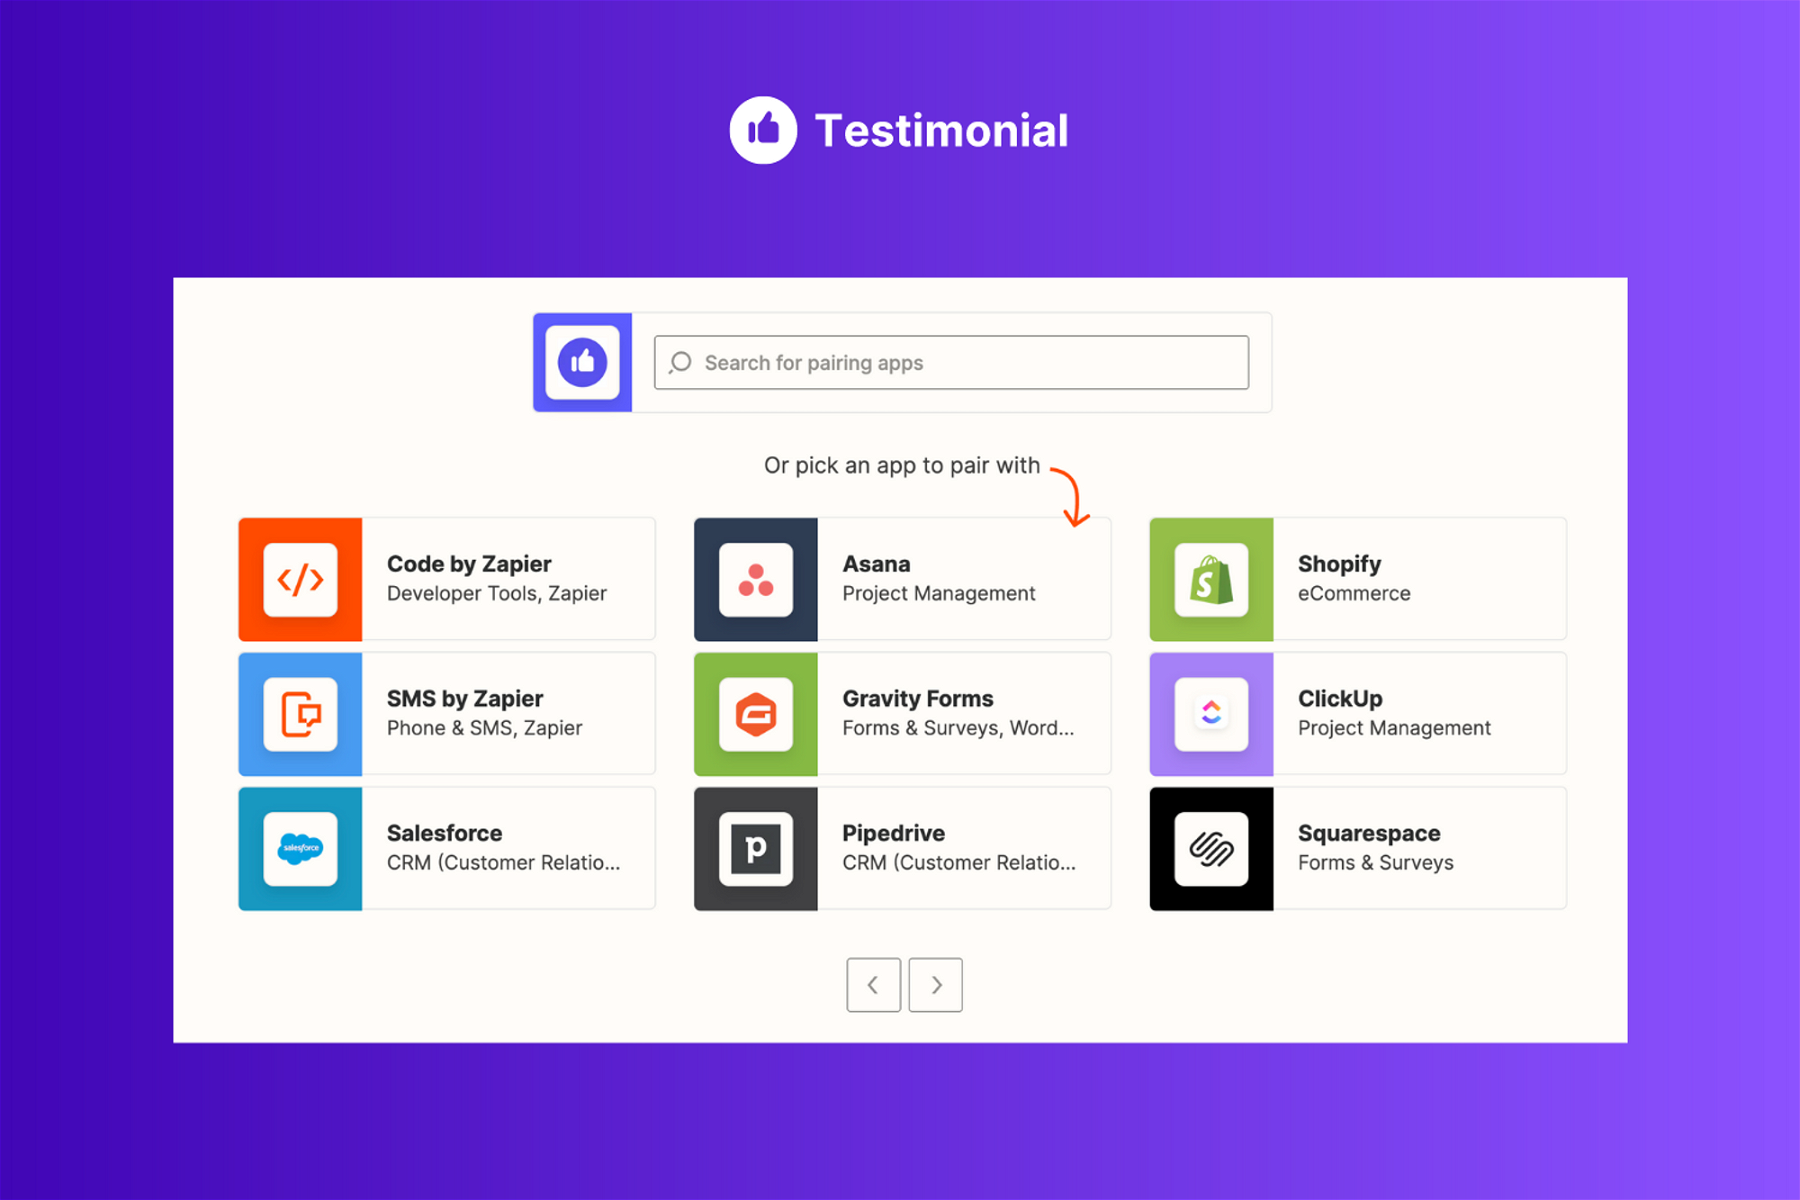 Automate testimonial collection with Zapier